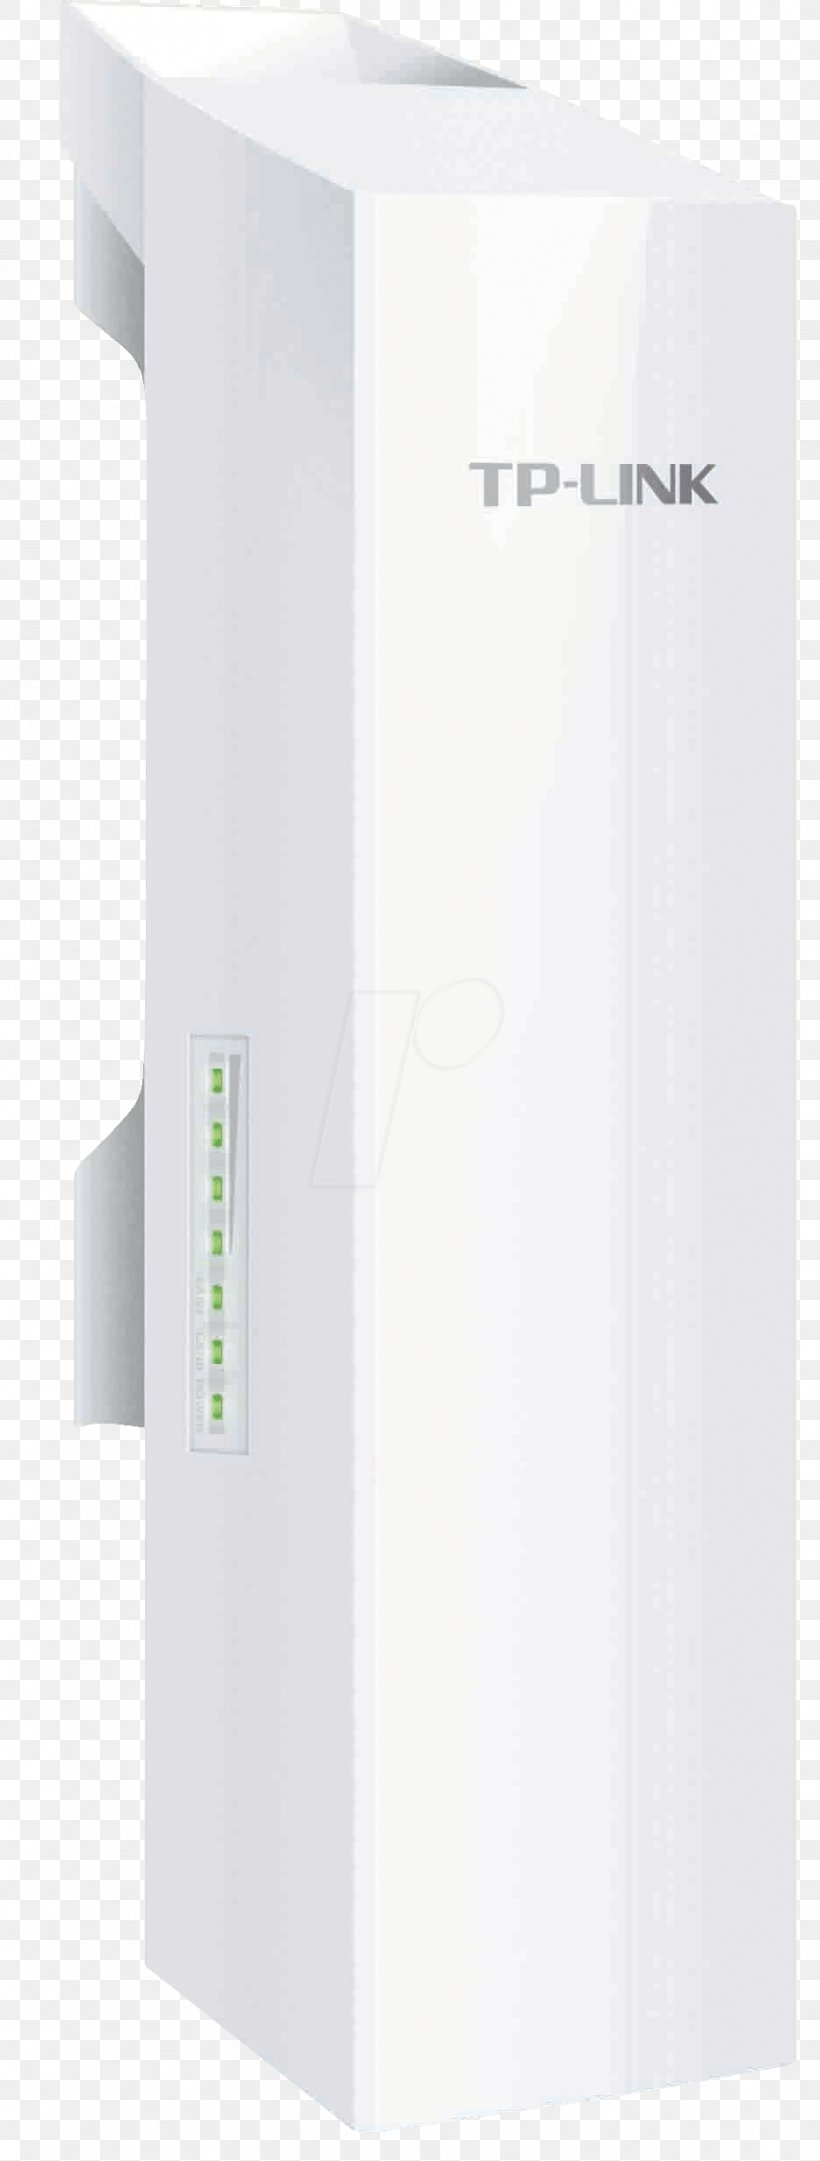 TP-LINK CPE210 TP-LINK CPE510 Wireless Access Points TP-LINK Auranet EAP115, PNG, 933x2459px, Wireless Access Points, Bridging, Customerpremises Equipment, Openwrt, Repeater Download Free